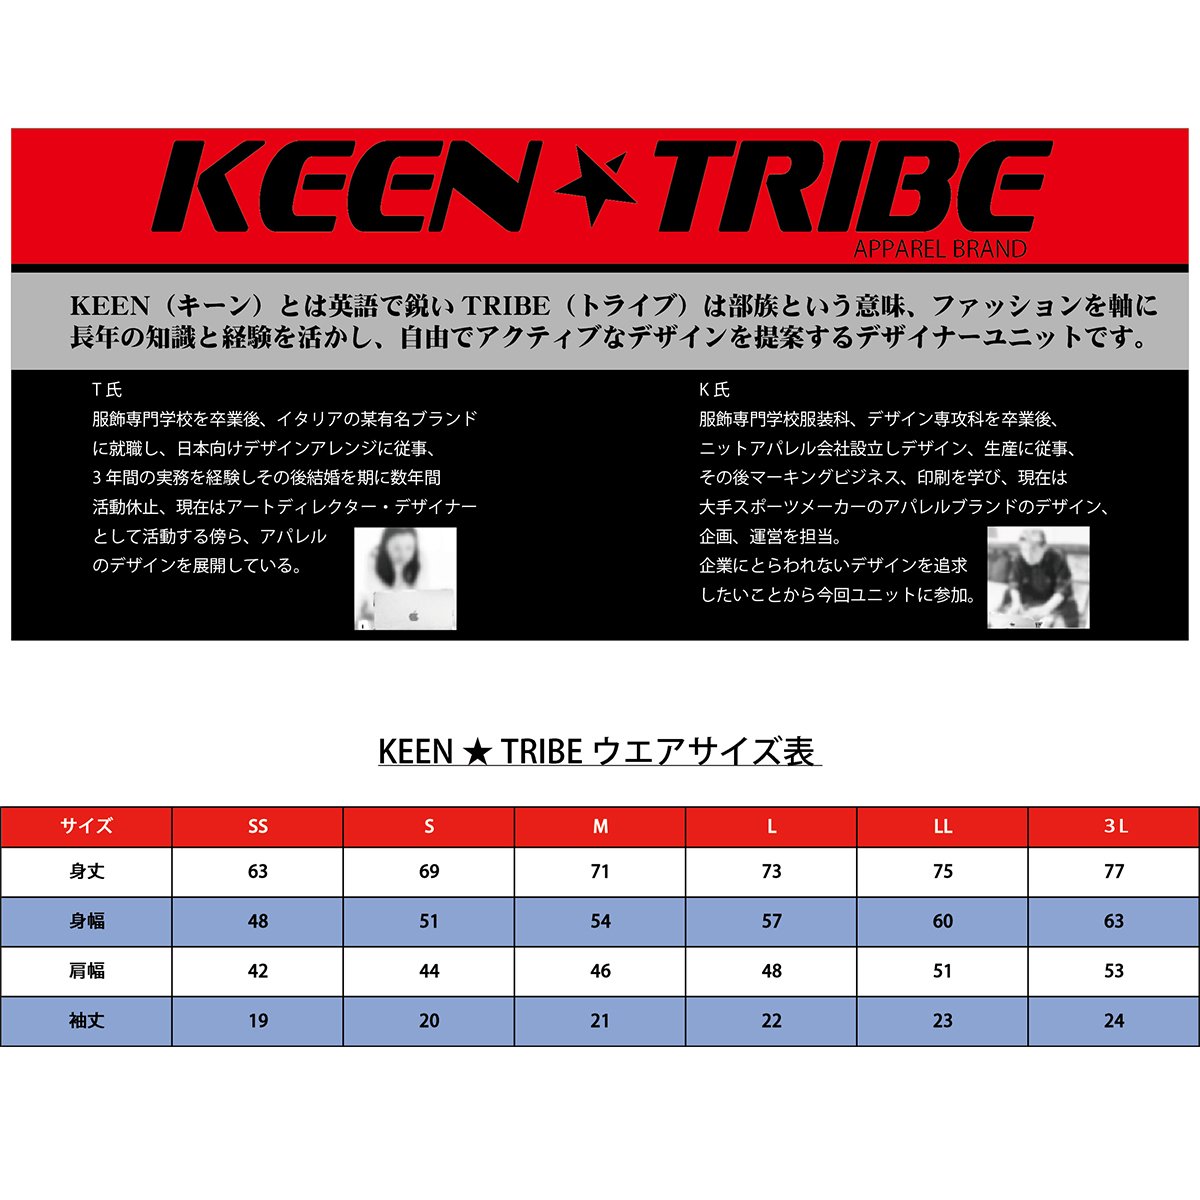 KEEN ★ TRIBE　KT-3(受注生産)